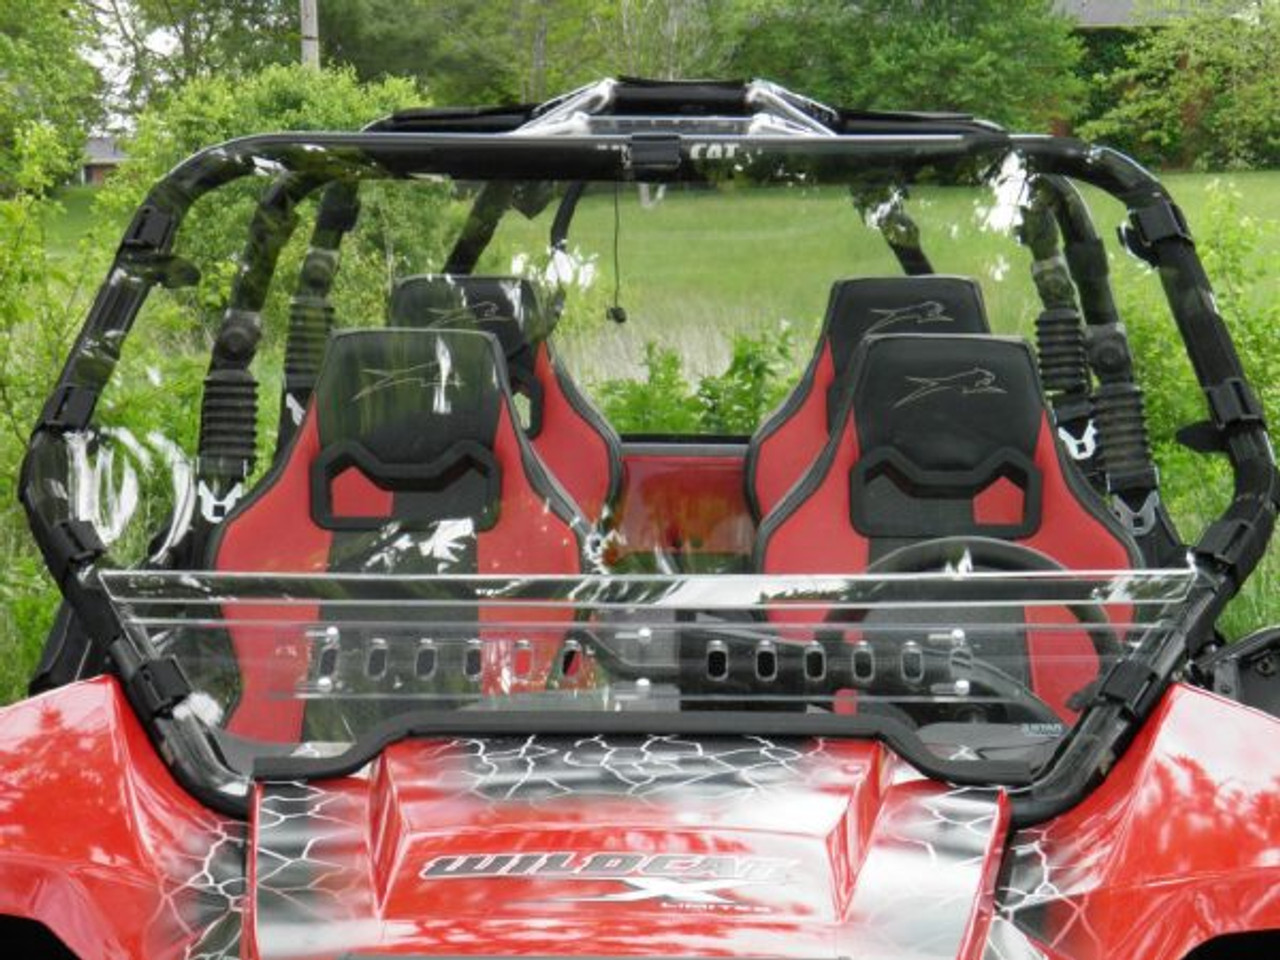 3 Star, side x side, arctic cat, wildcat 4, front view